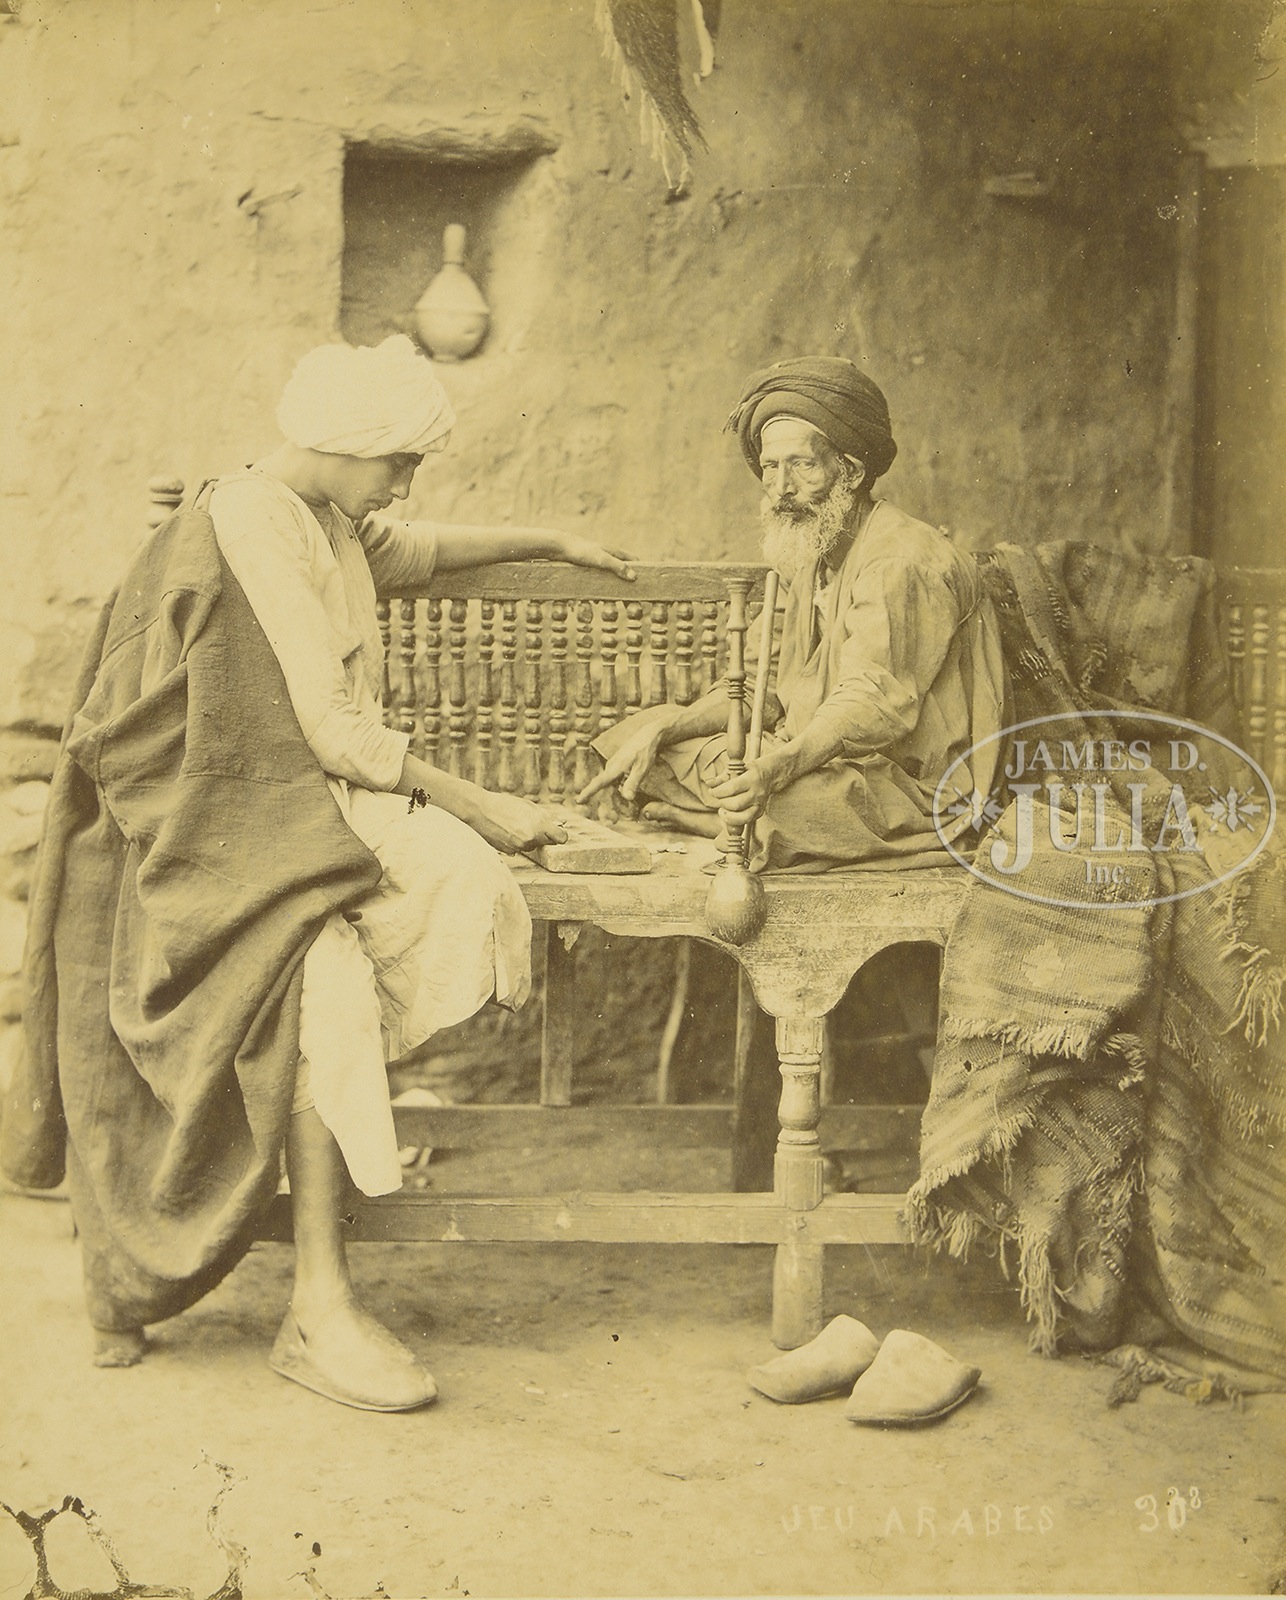 EXTRAORDINARY & MASSIVE LIFE LONG COLLECTION OF RARE ASIAN PHOTOGRAPHS AMASSED BY DR. HELGA WALL- - Image 104 of 222